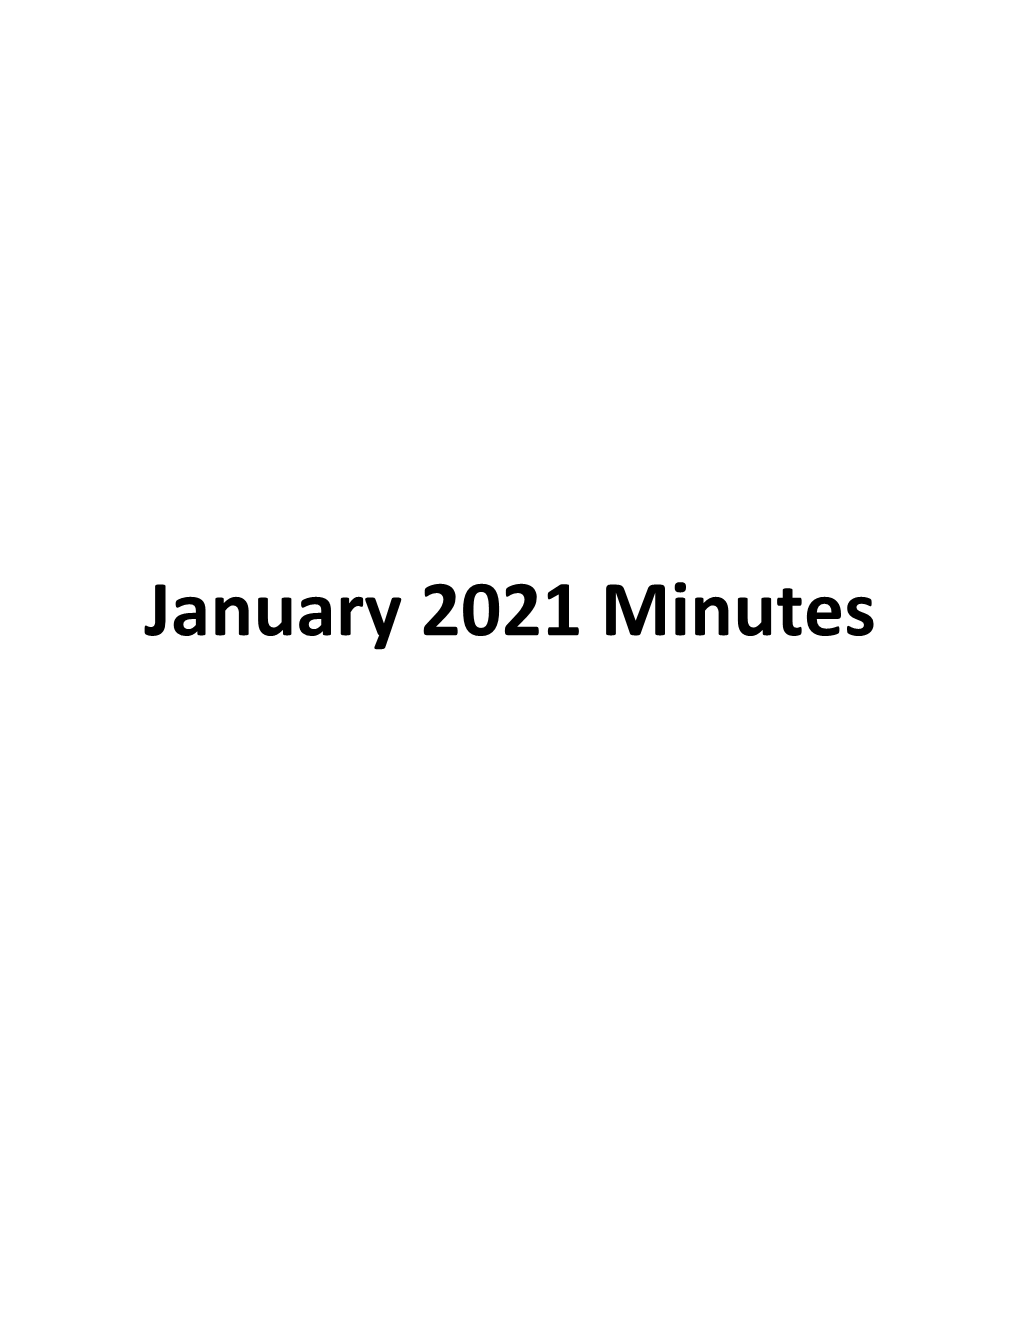 Budget Committee Minutes January 13, 2021 9:00 AM EST Indiana Statehouse House Chamber 200 W Washington St., Indianapolis, in 46204